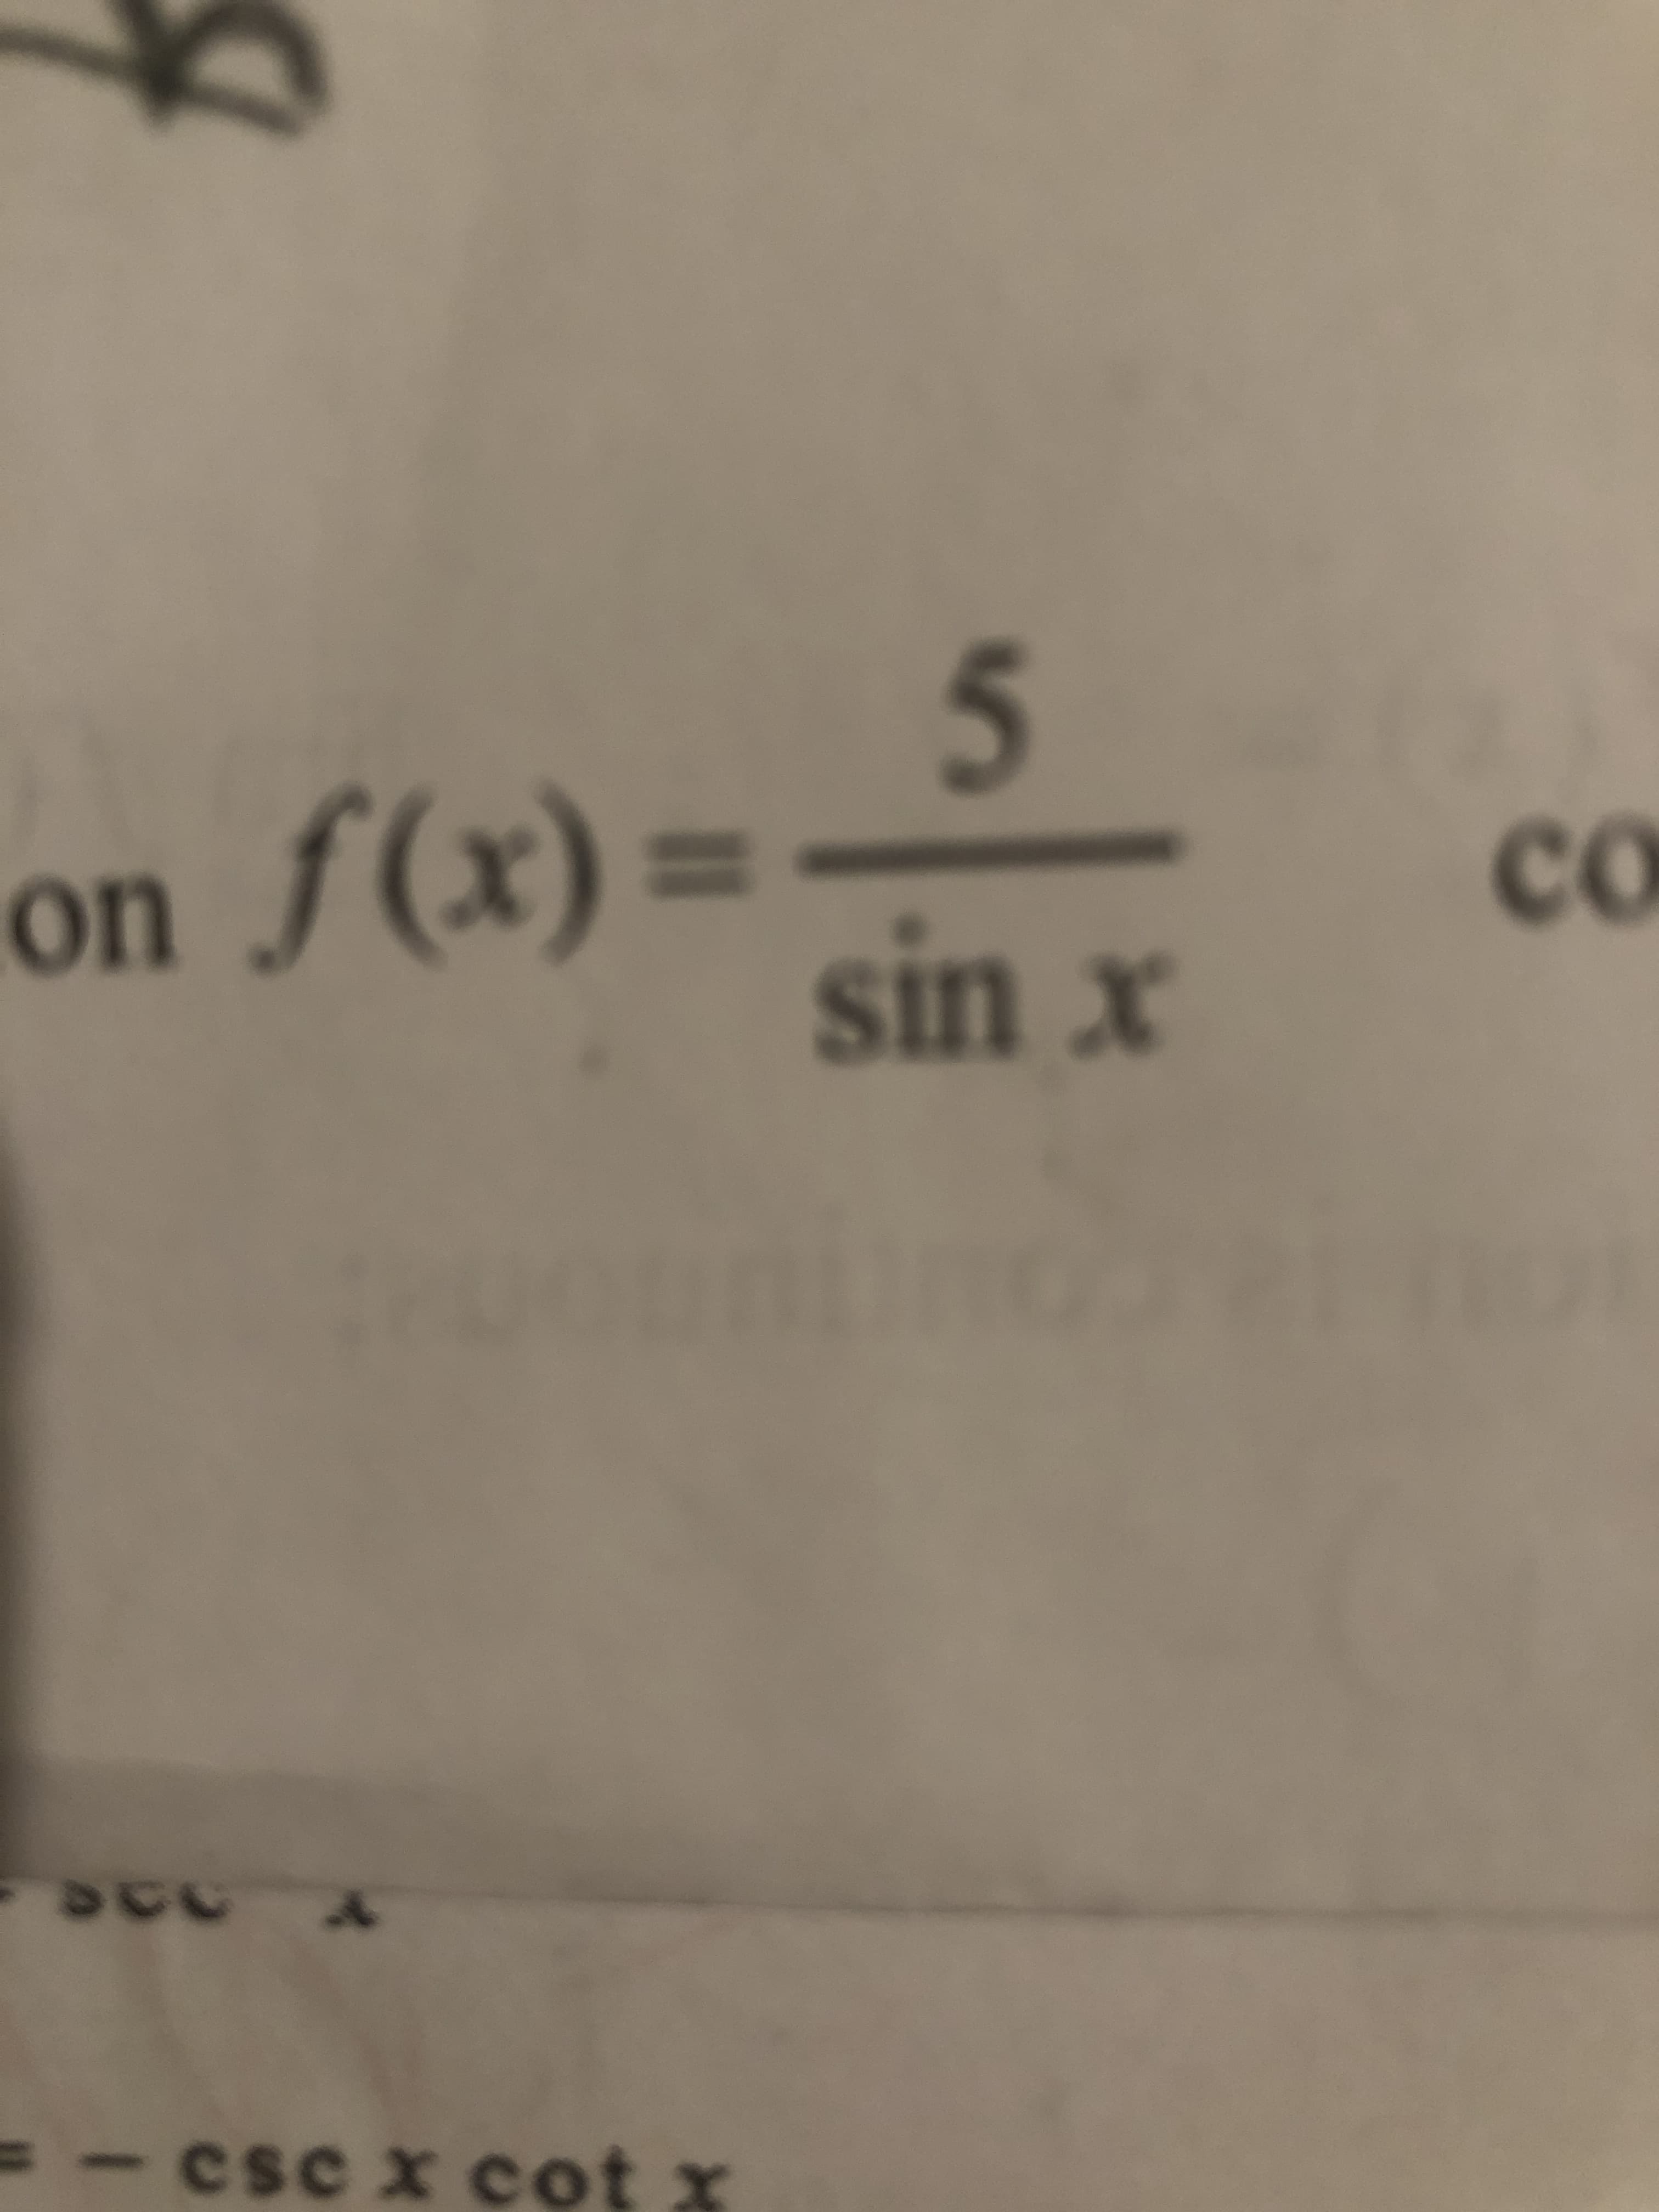 -Csc x cot
238
sin x
= (x)/ uo
co
5.
